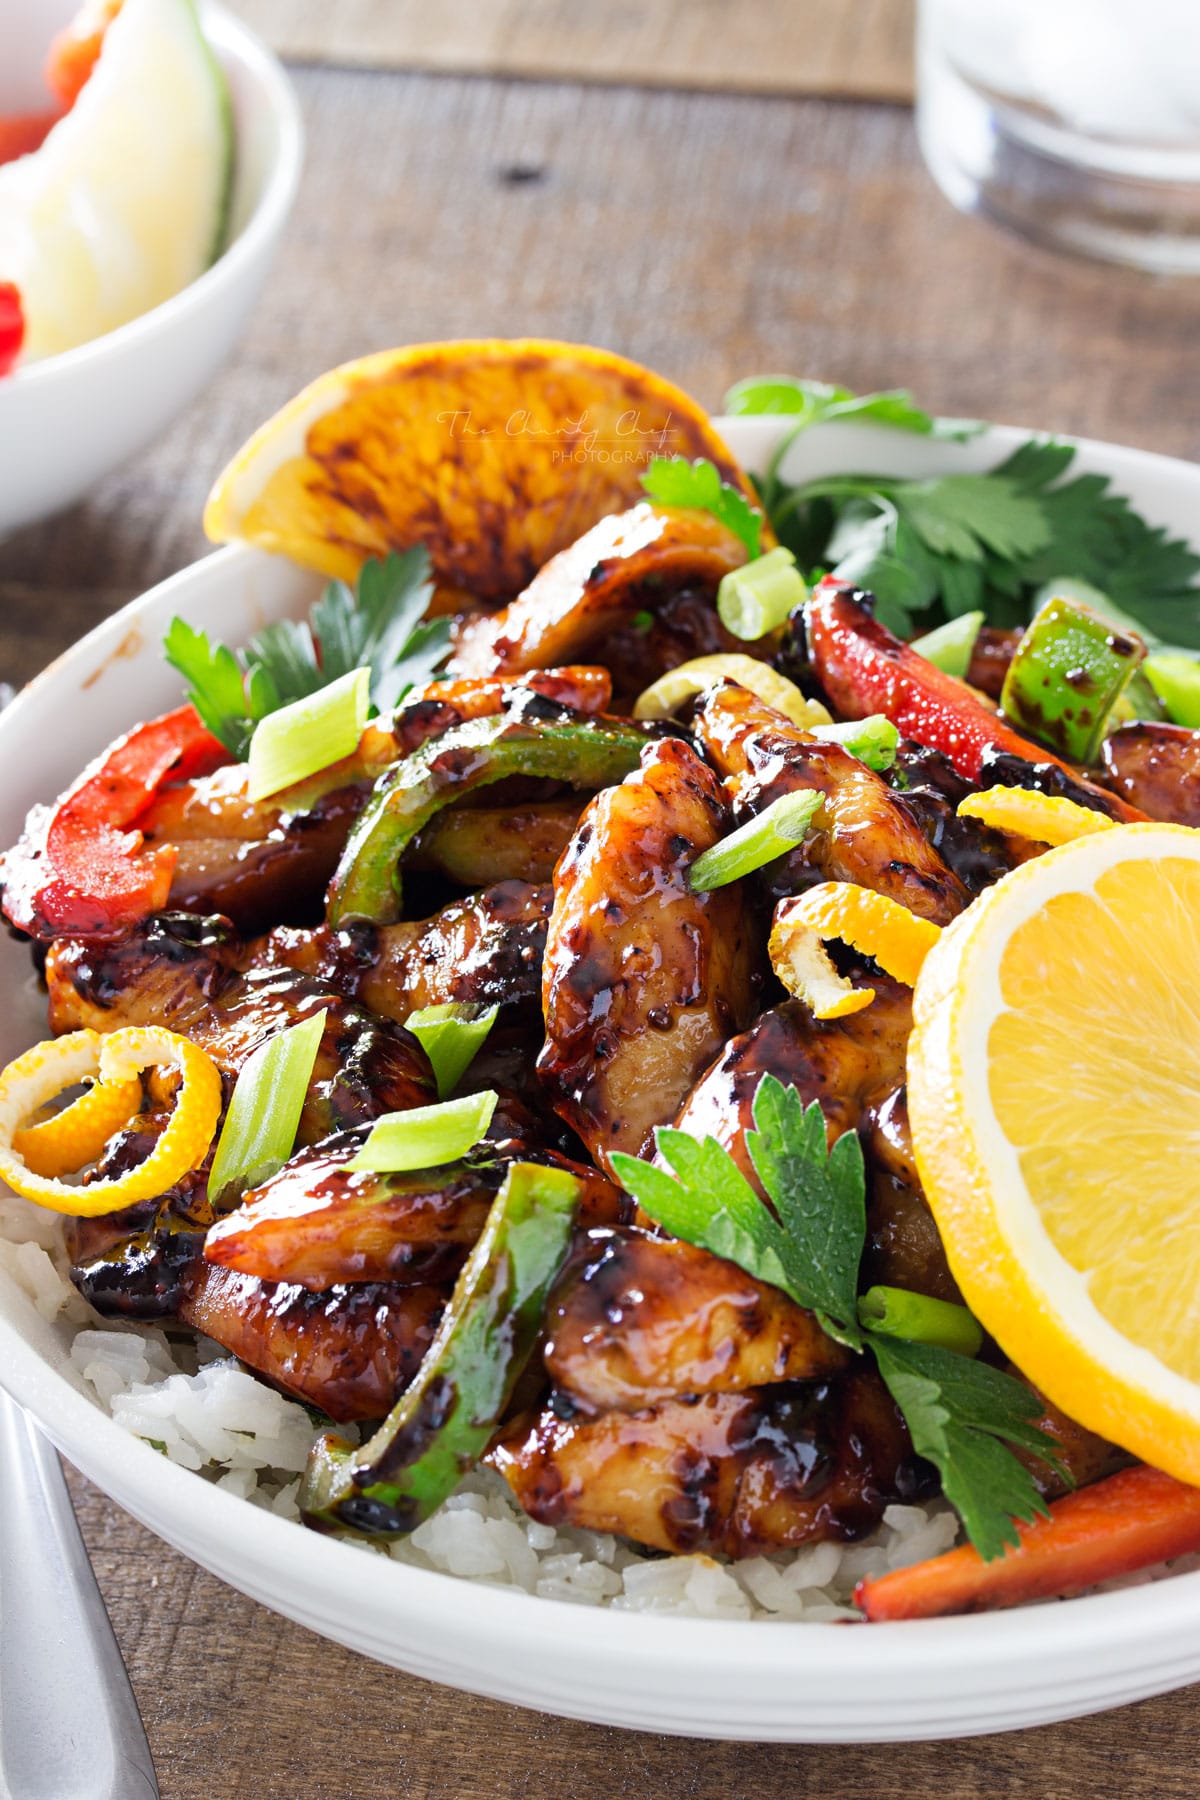 Cajun Honey Glazed Chicken Bowls | This Cajun honey glazed chicken bowl is packed with bright, fresh ingredients! The chicken is actually cooked IN the marinade, allowing for maximum flavor. | http://thechunkychef.com